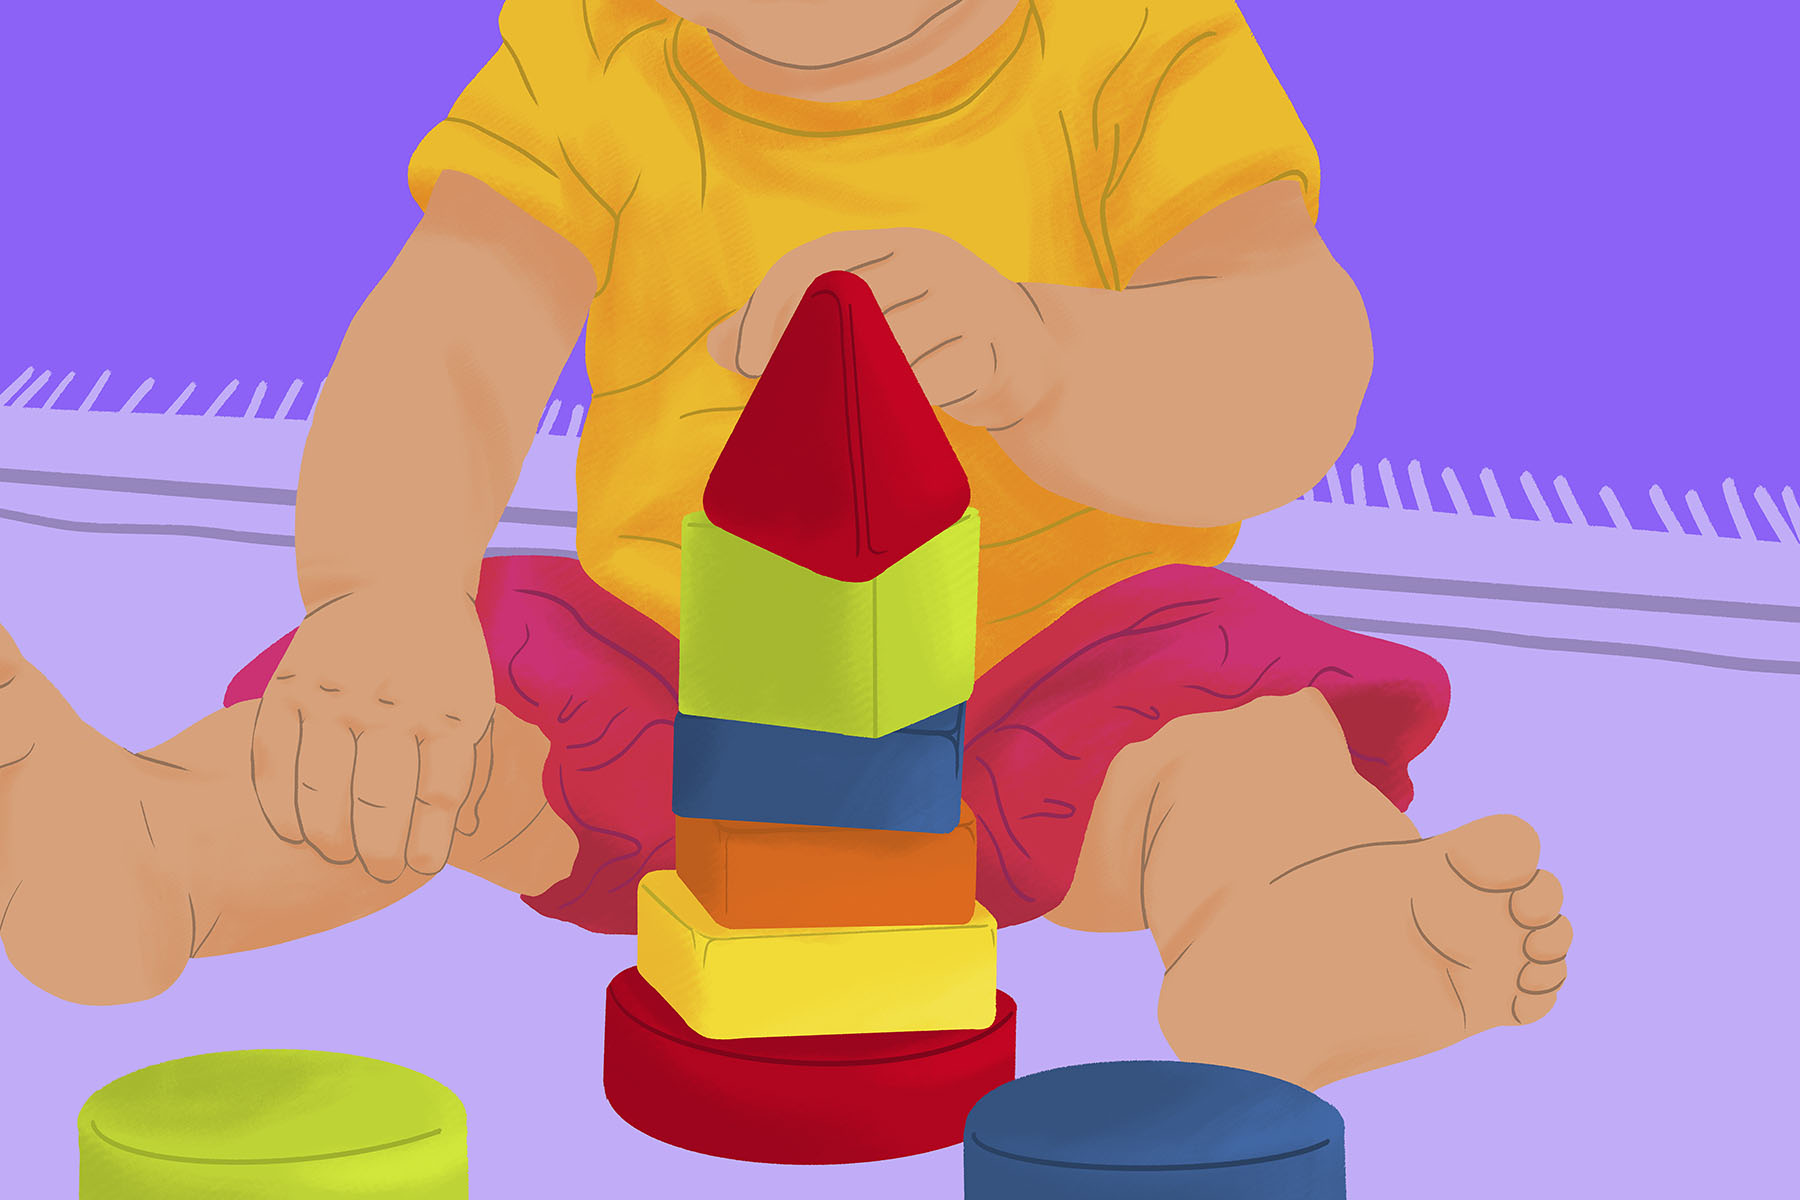 Close up illustration of a baby stacking block toys.